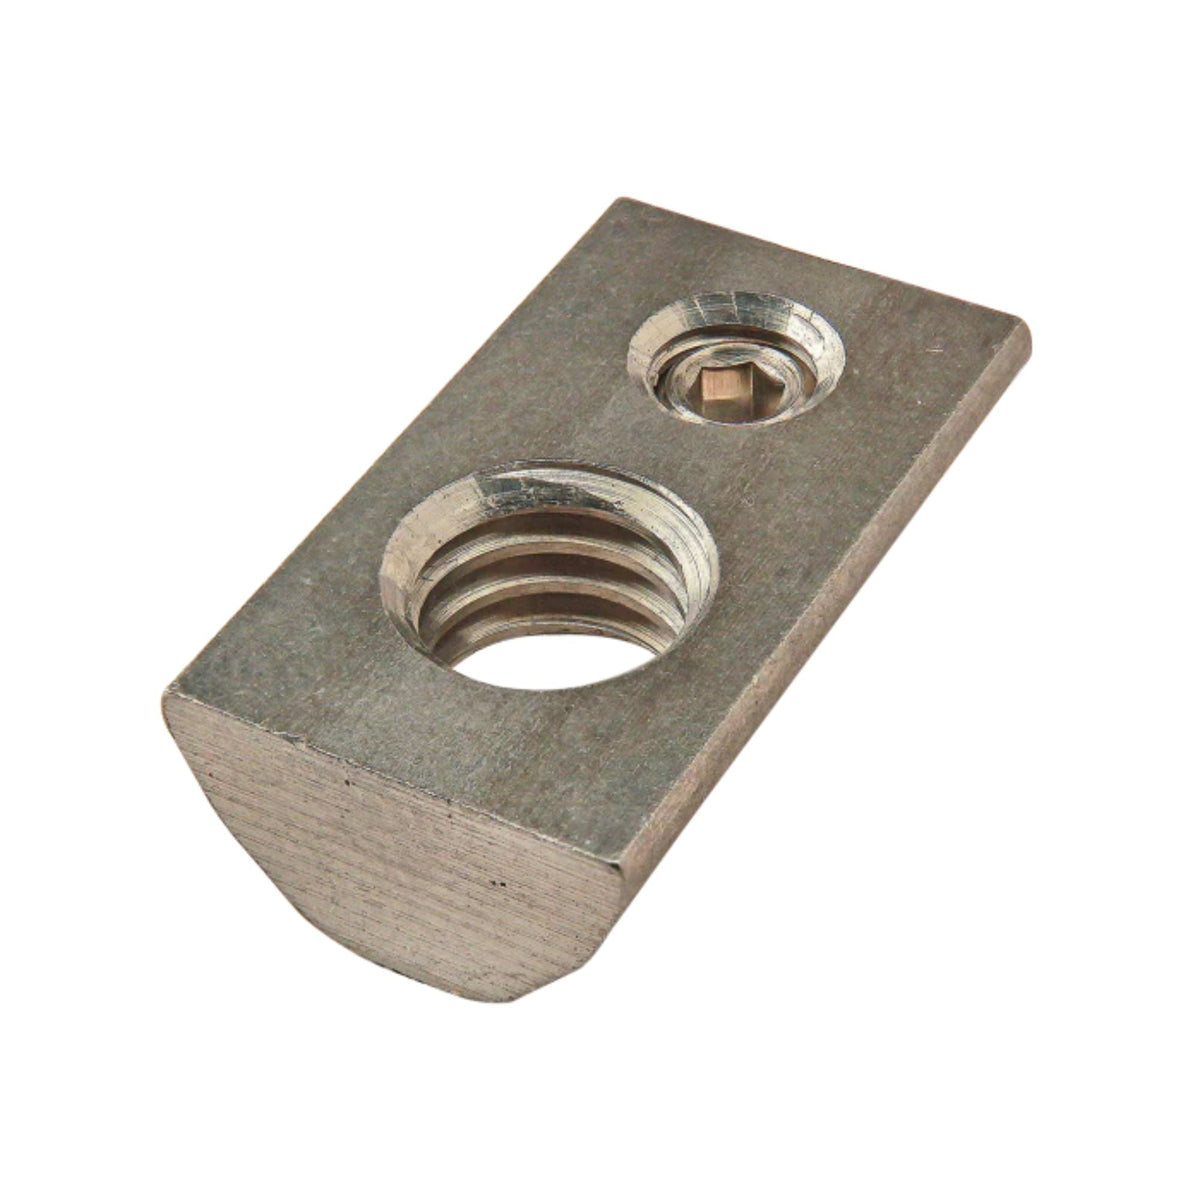 metal, rectangular t-nut with a rounded bottom, a flat top, a threaded hole on one side and a hole with a hex screw on the other side